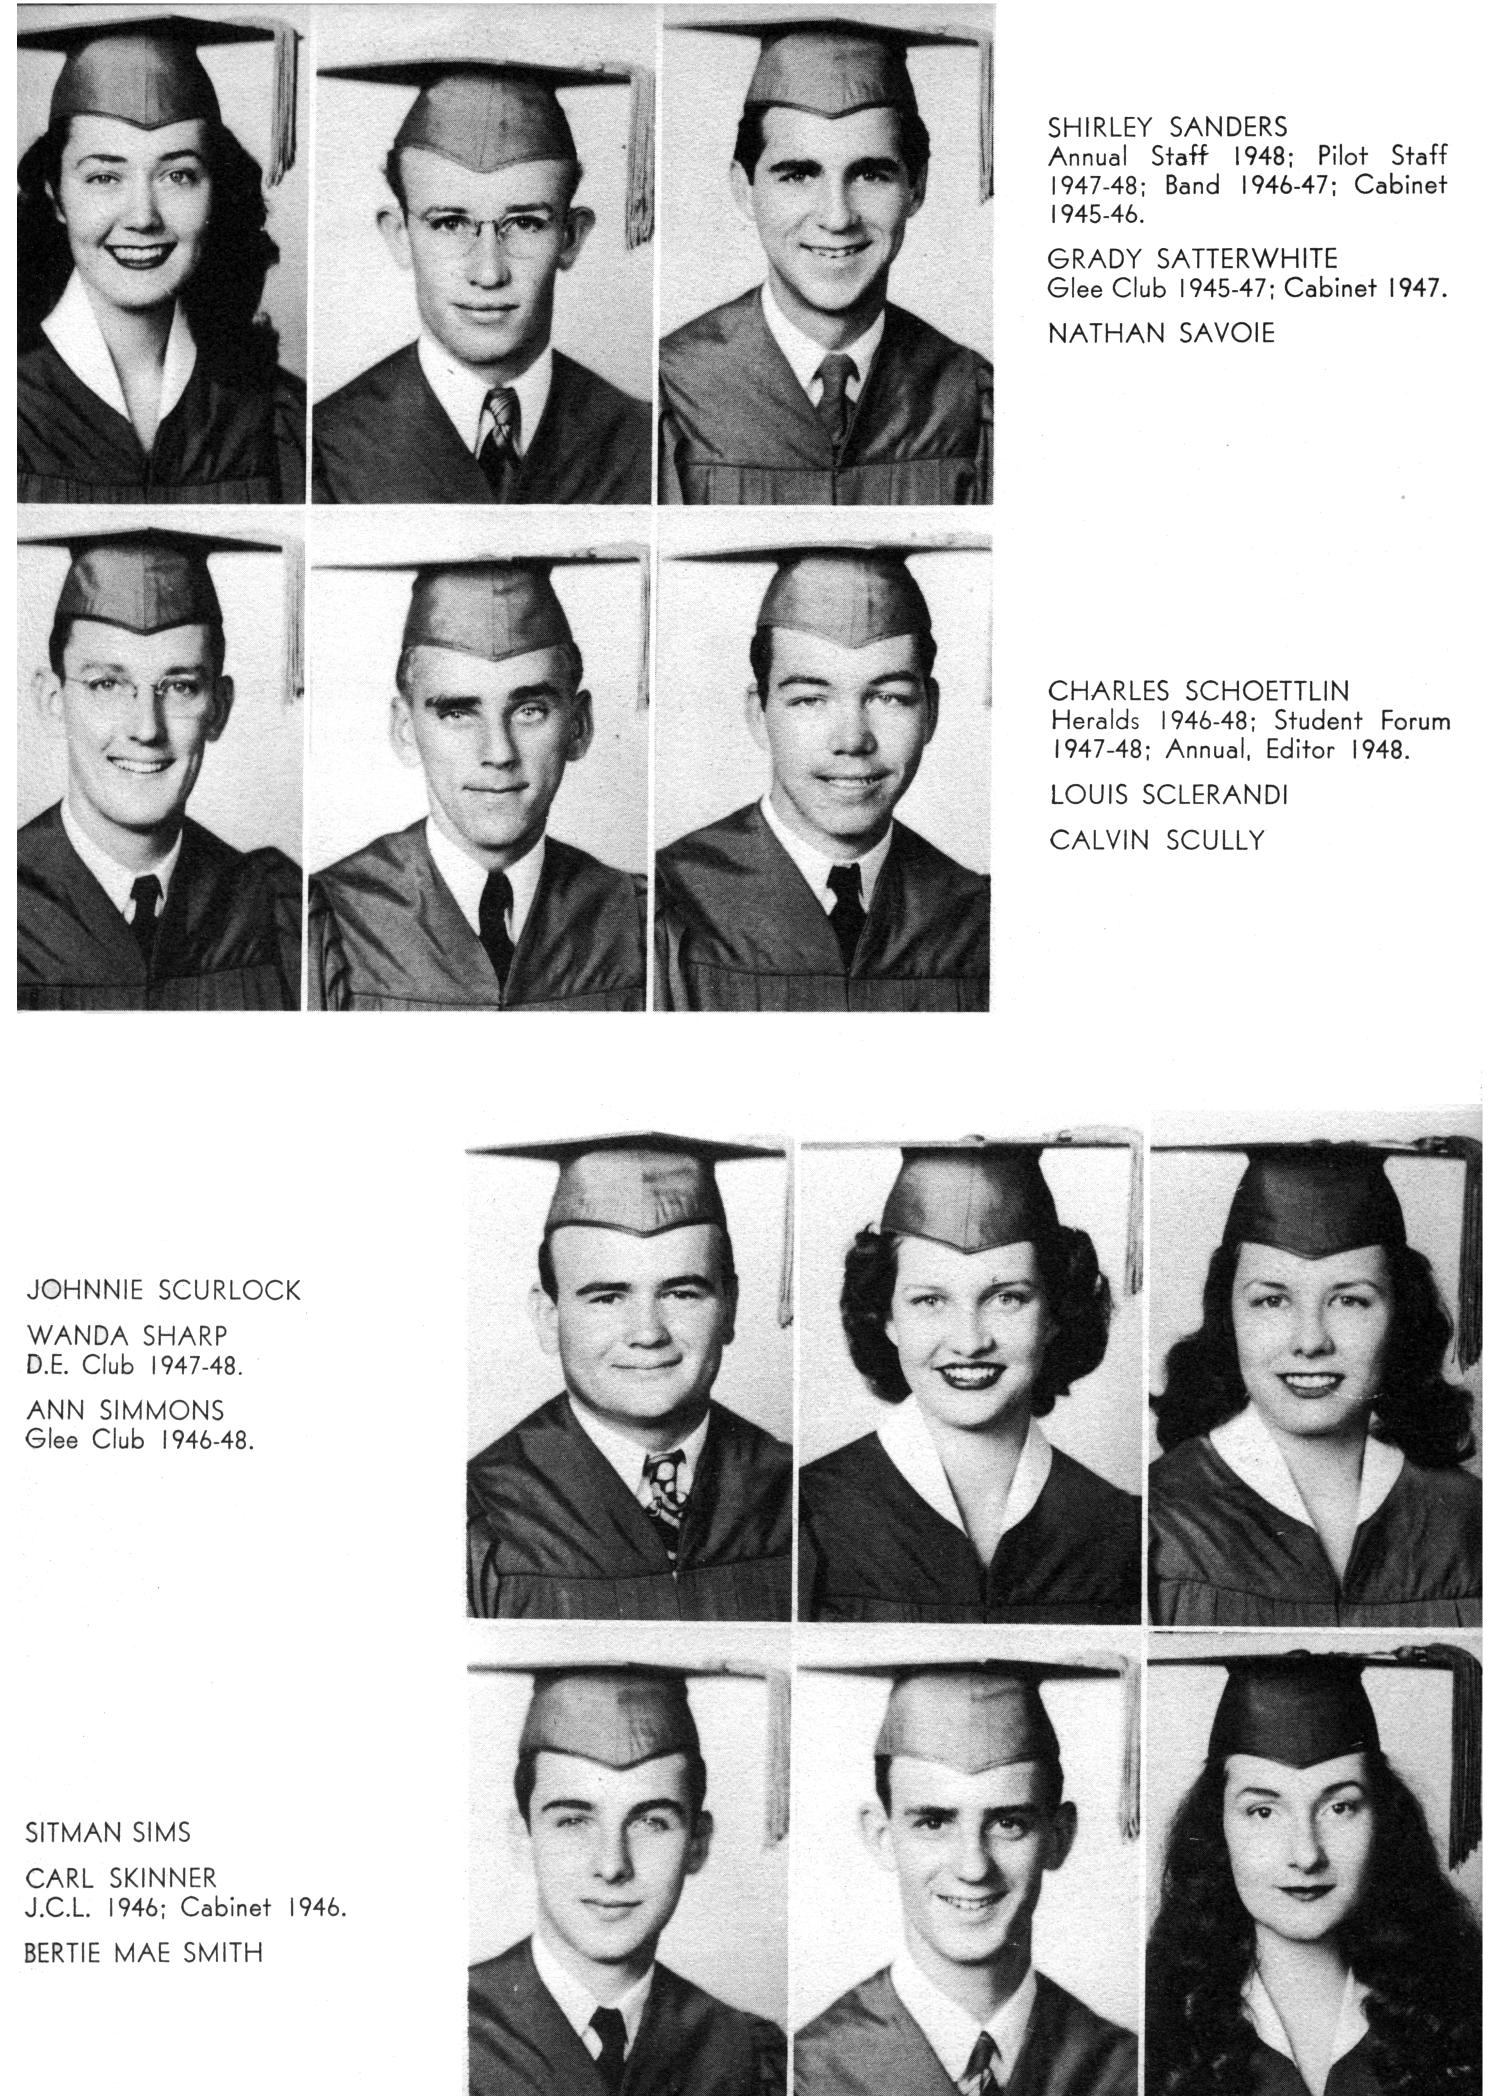 The Yellow Jacket, Yearbook of Thomas Jefferson High School, 1948
                                                
                                                    47
                                                